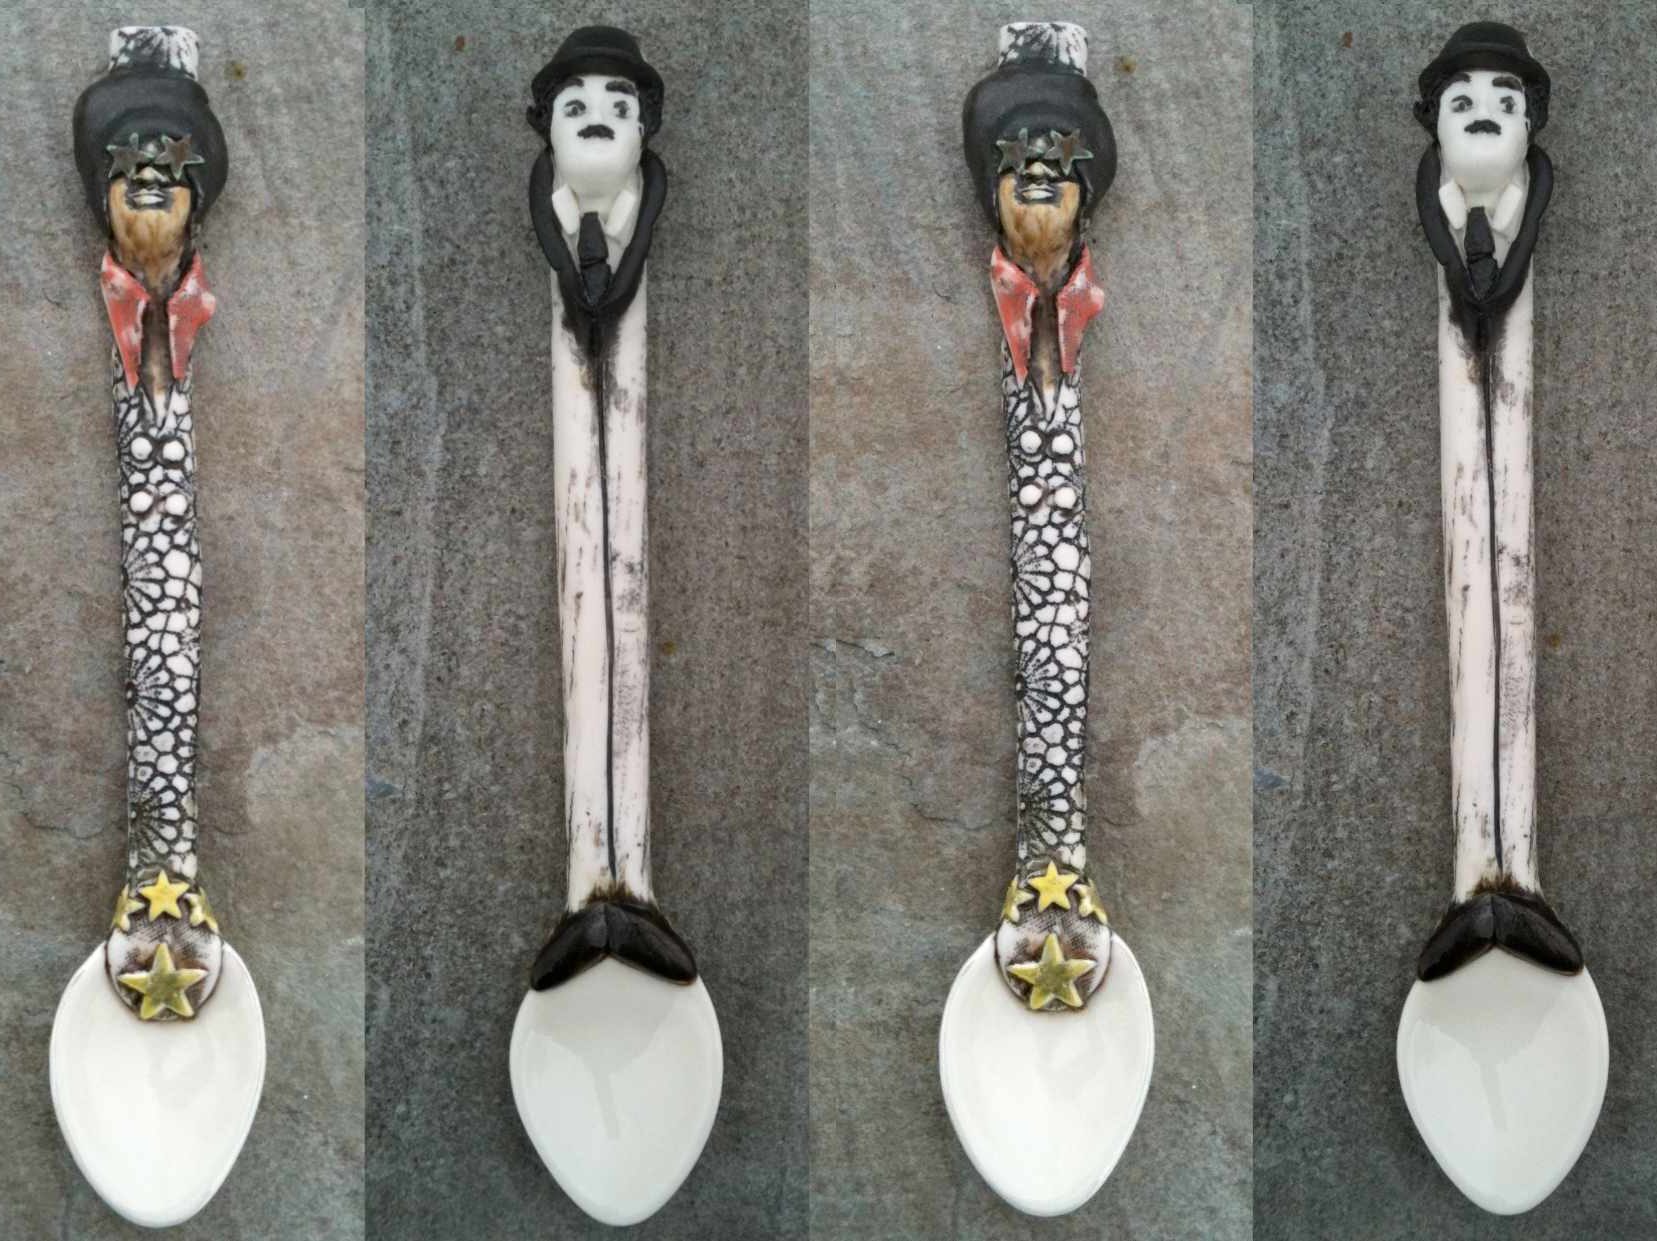 Photo of porcelain spoons with characters heads on the handle